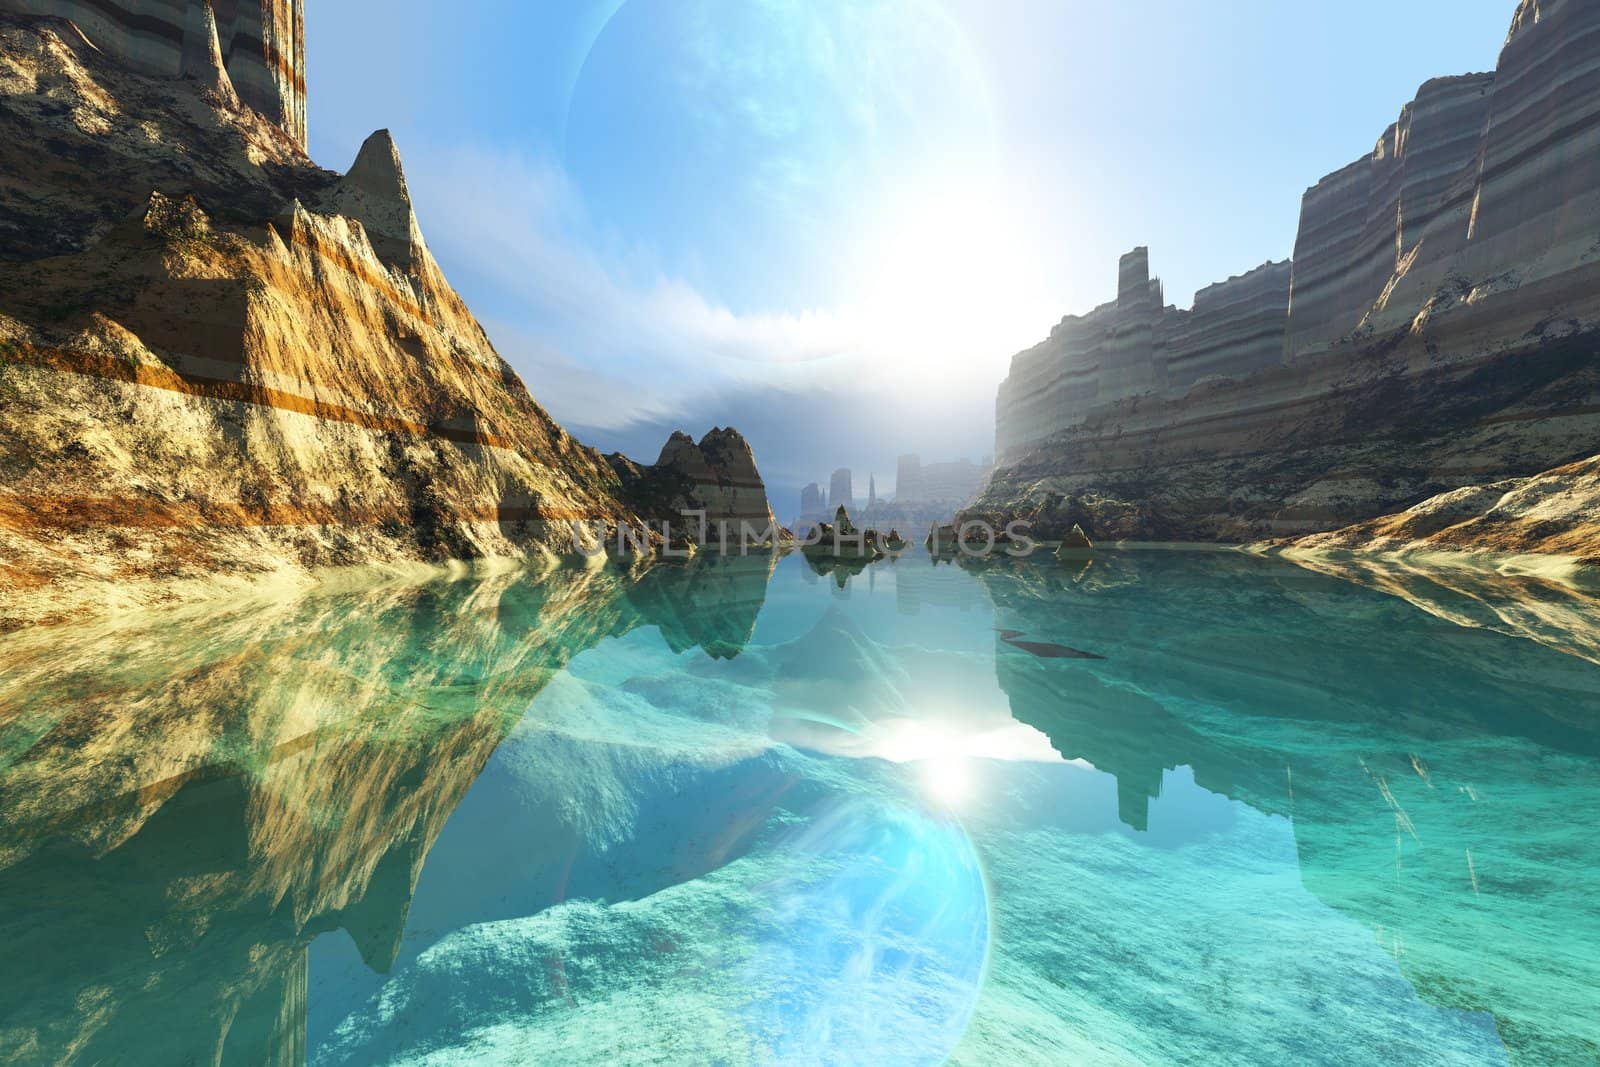 Clear canyon waters reflect the alien planet in the sky.